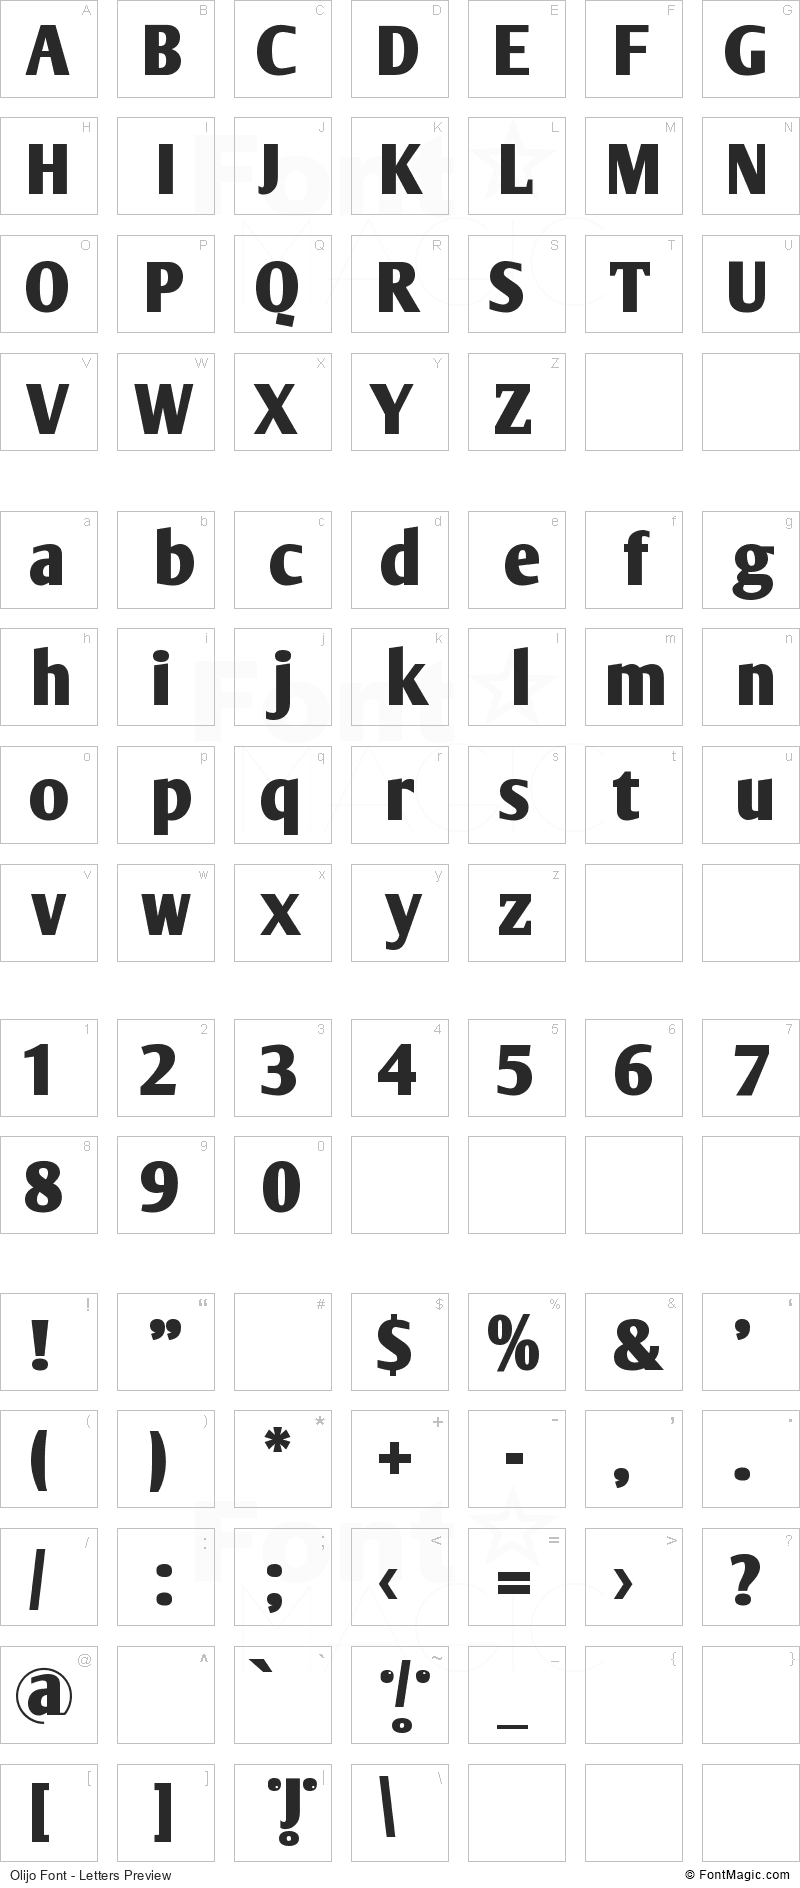 Olijo Font - All Latters Preview Chart